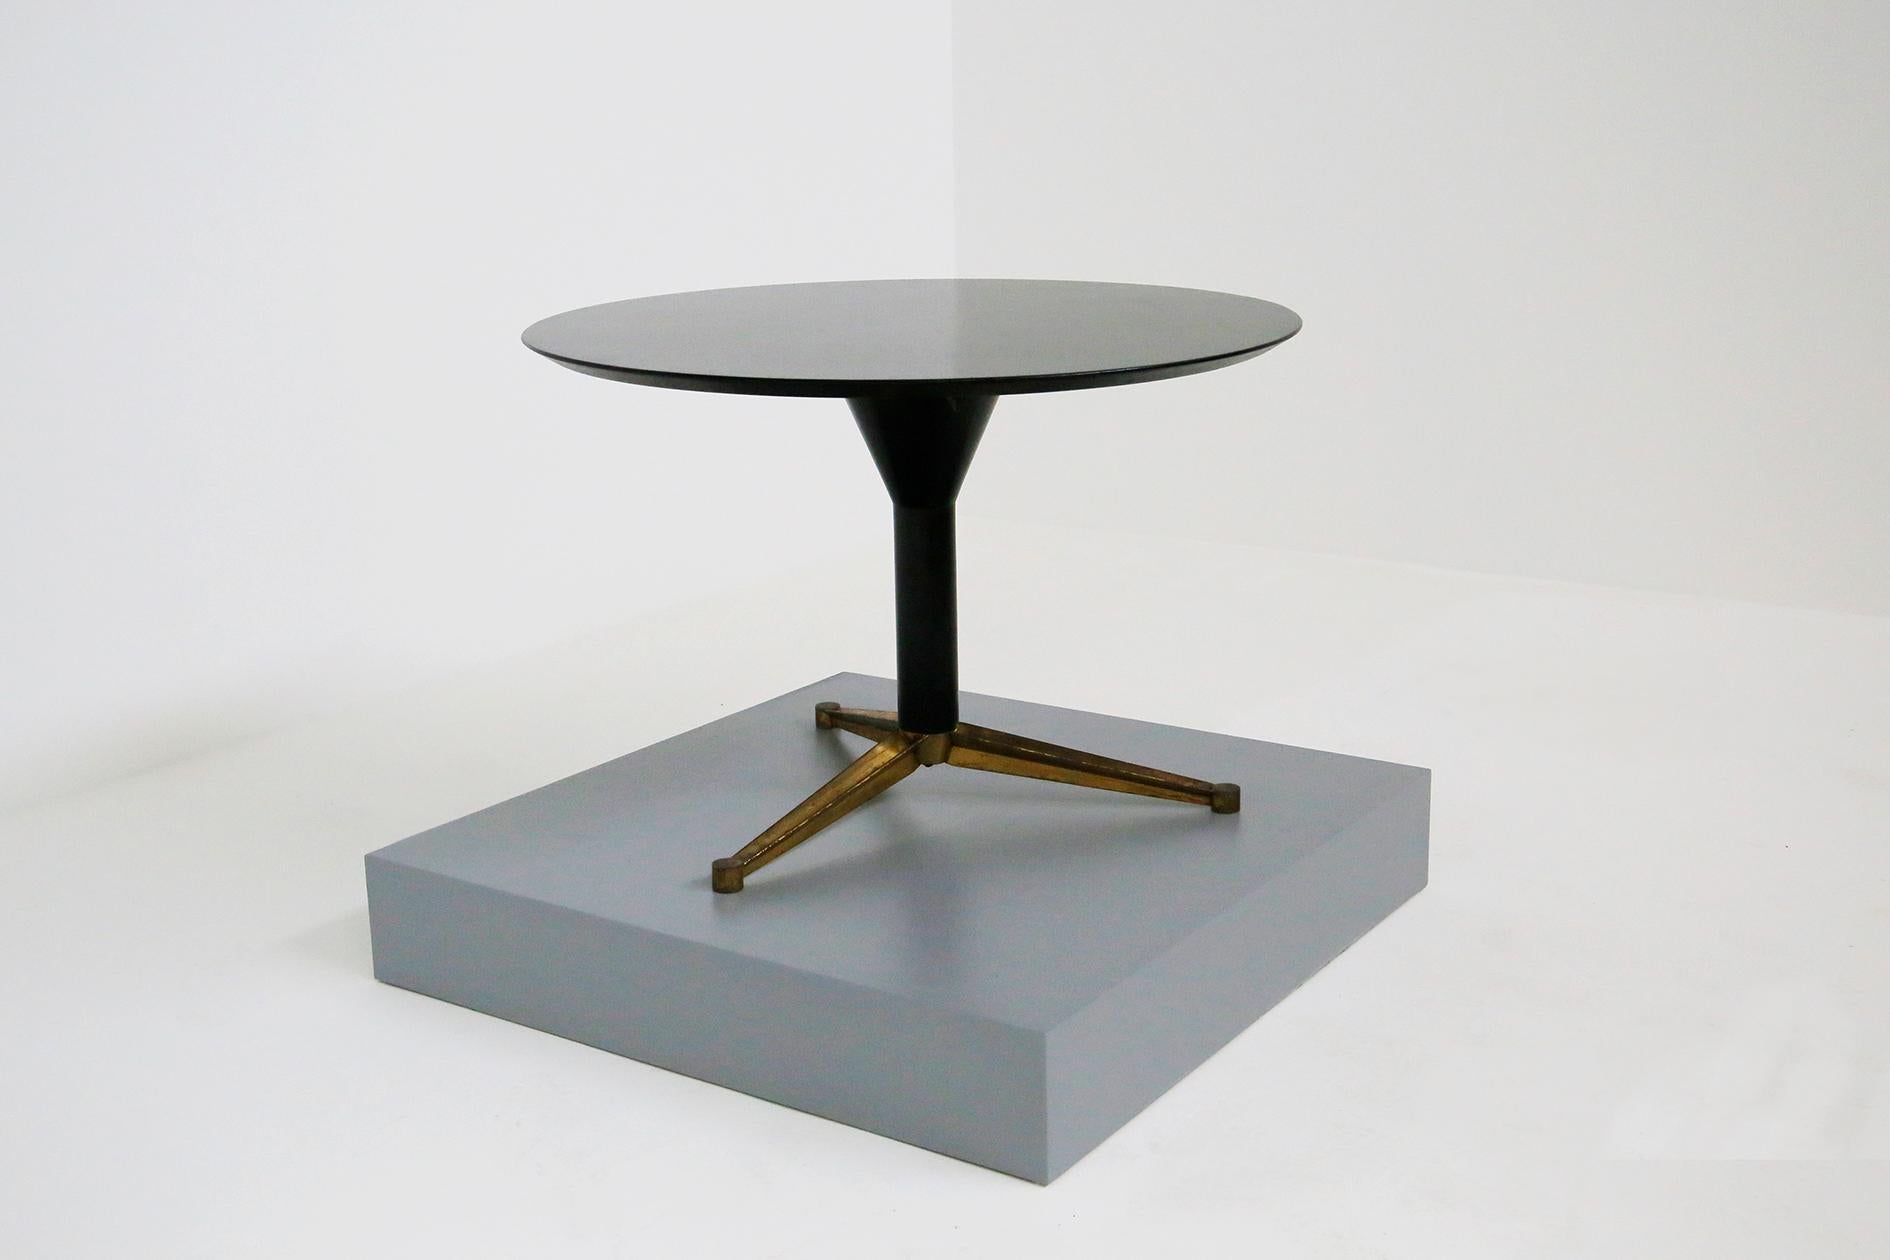 Round table attributed to Melchiorre Bega from the 1950s. The table is in black ebonized wood. Its pendant support creates a harmonious and elegant line with the realization. As a base three star-shaped brass feet are developed under the pendant.